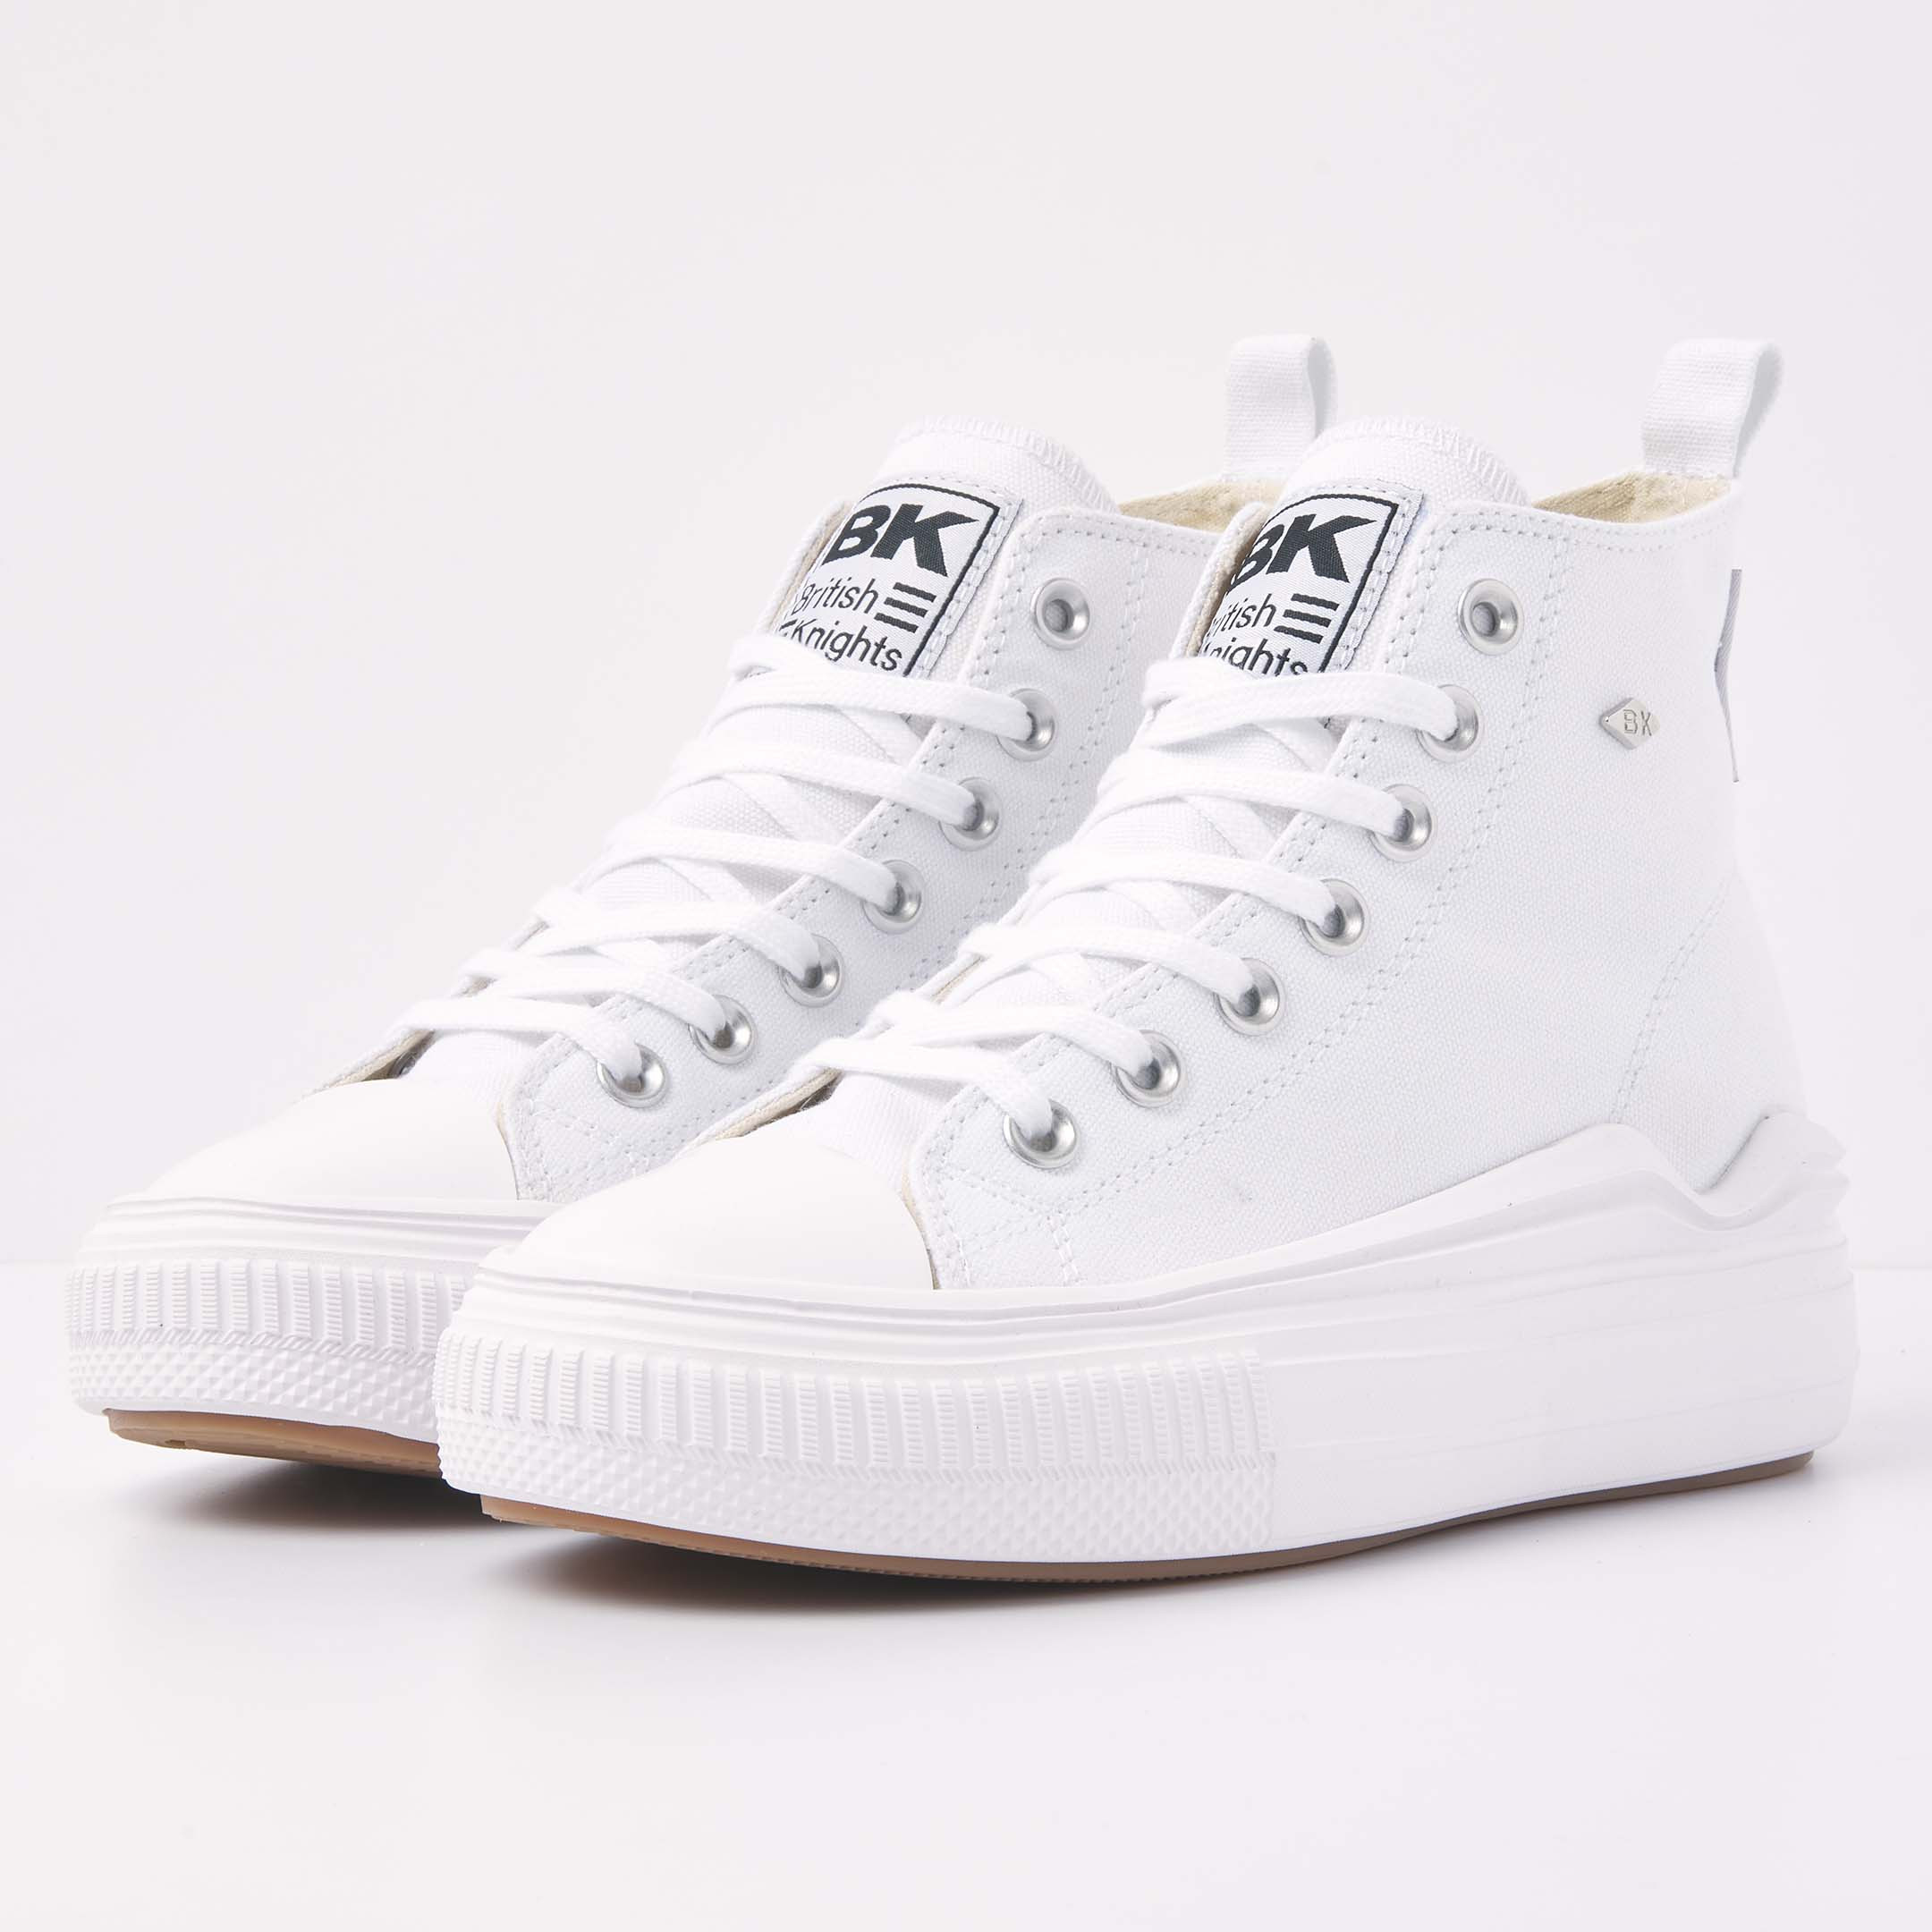 British Knights Sneaker Front view  B51-3734-02 KAYA FLOW MID HIGH-TOP FEMALE